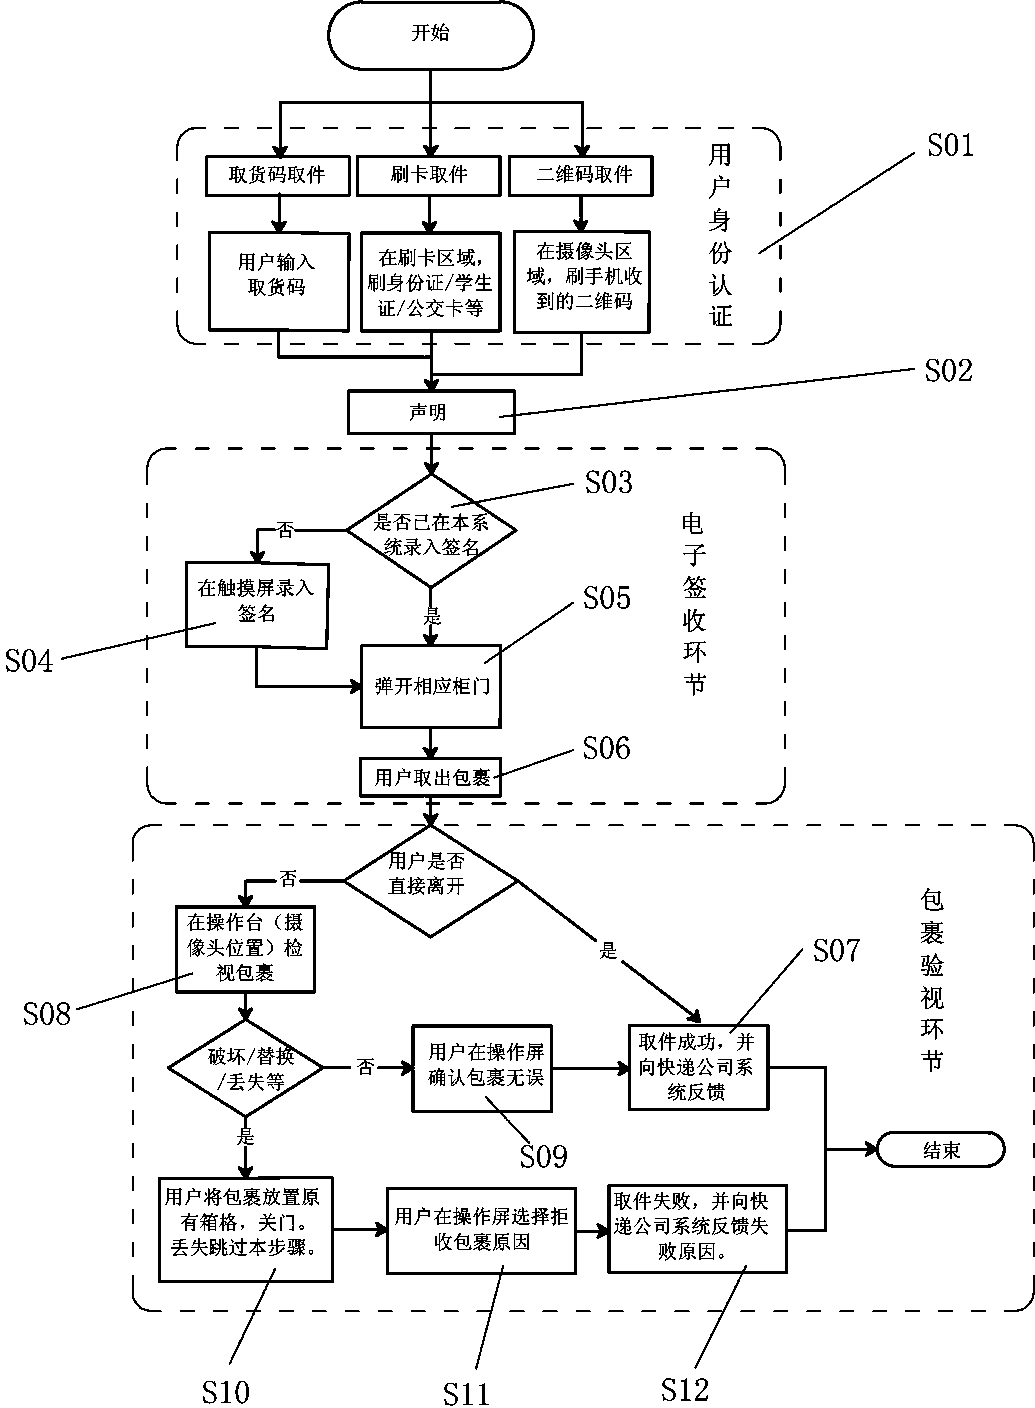 Method for user to receive express item through intelligent express drop-in box